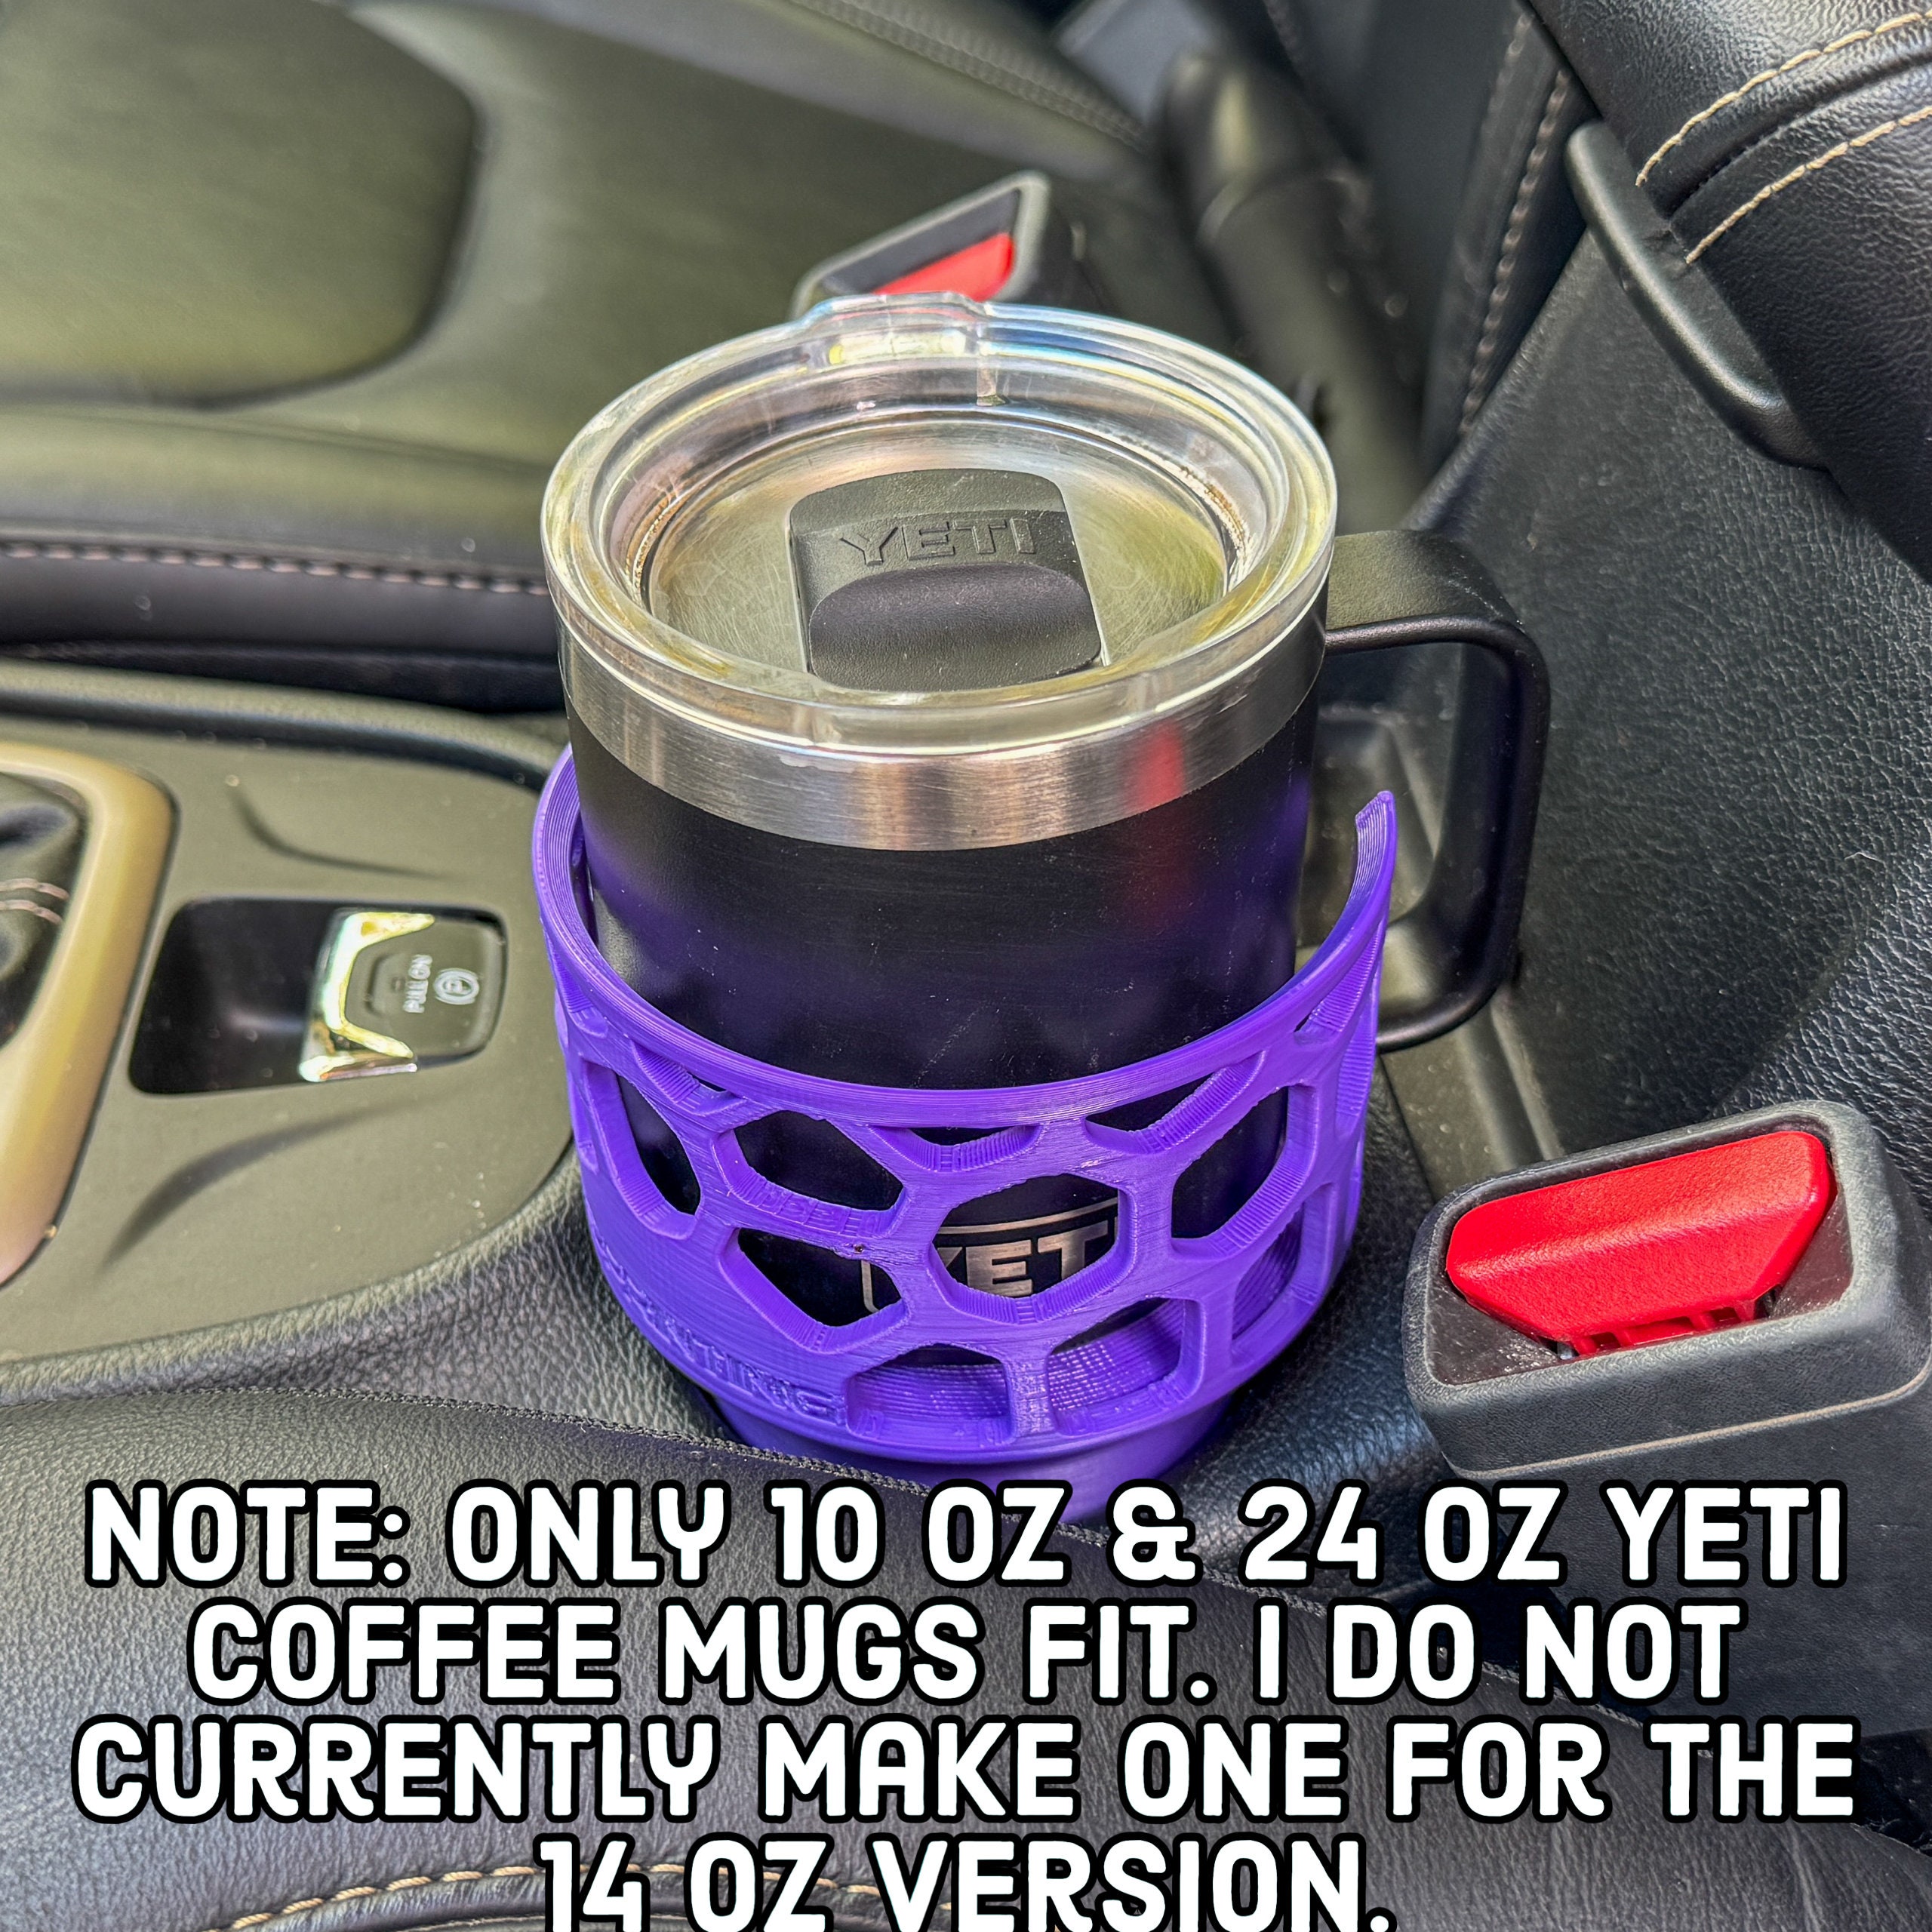 2017 Chevrolet Impala CupCoffee – YETI ® cup holder for your car